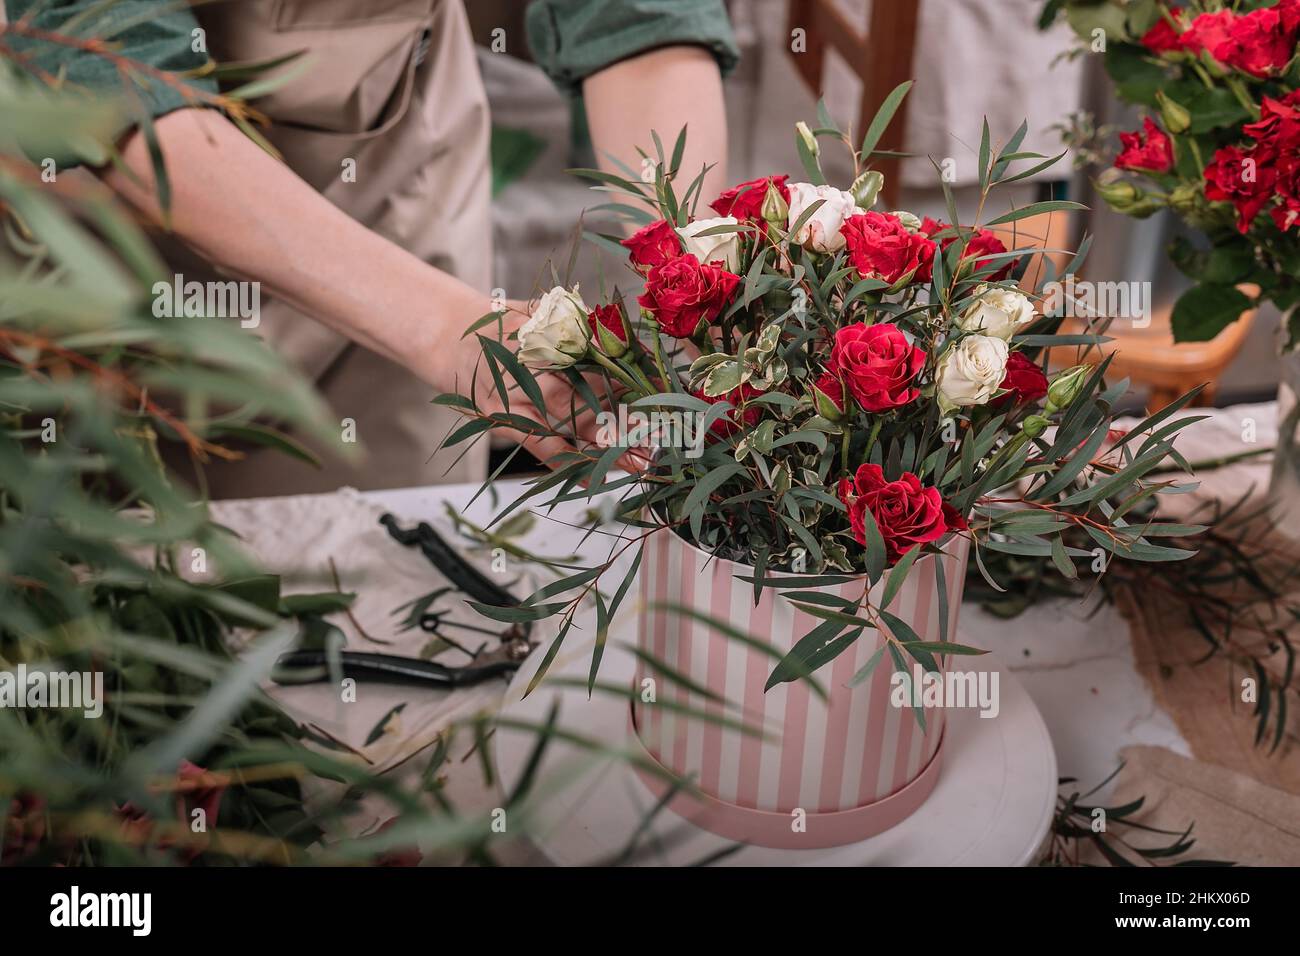 Florist make gift bouquets in hat boxes. Graceful female hands make a beautiful bouquet. Florist workplace. Small business concept. Front view. Flower Stock Photo